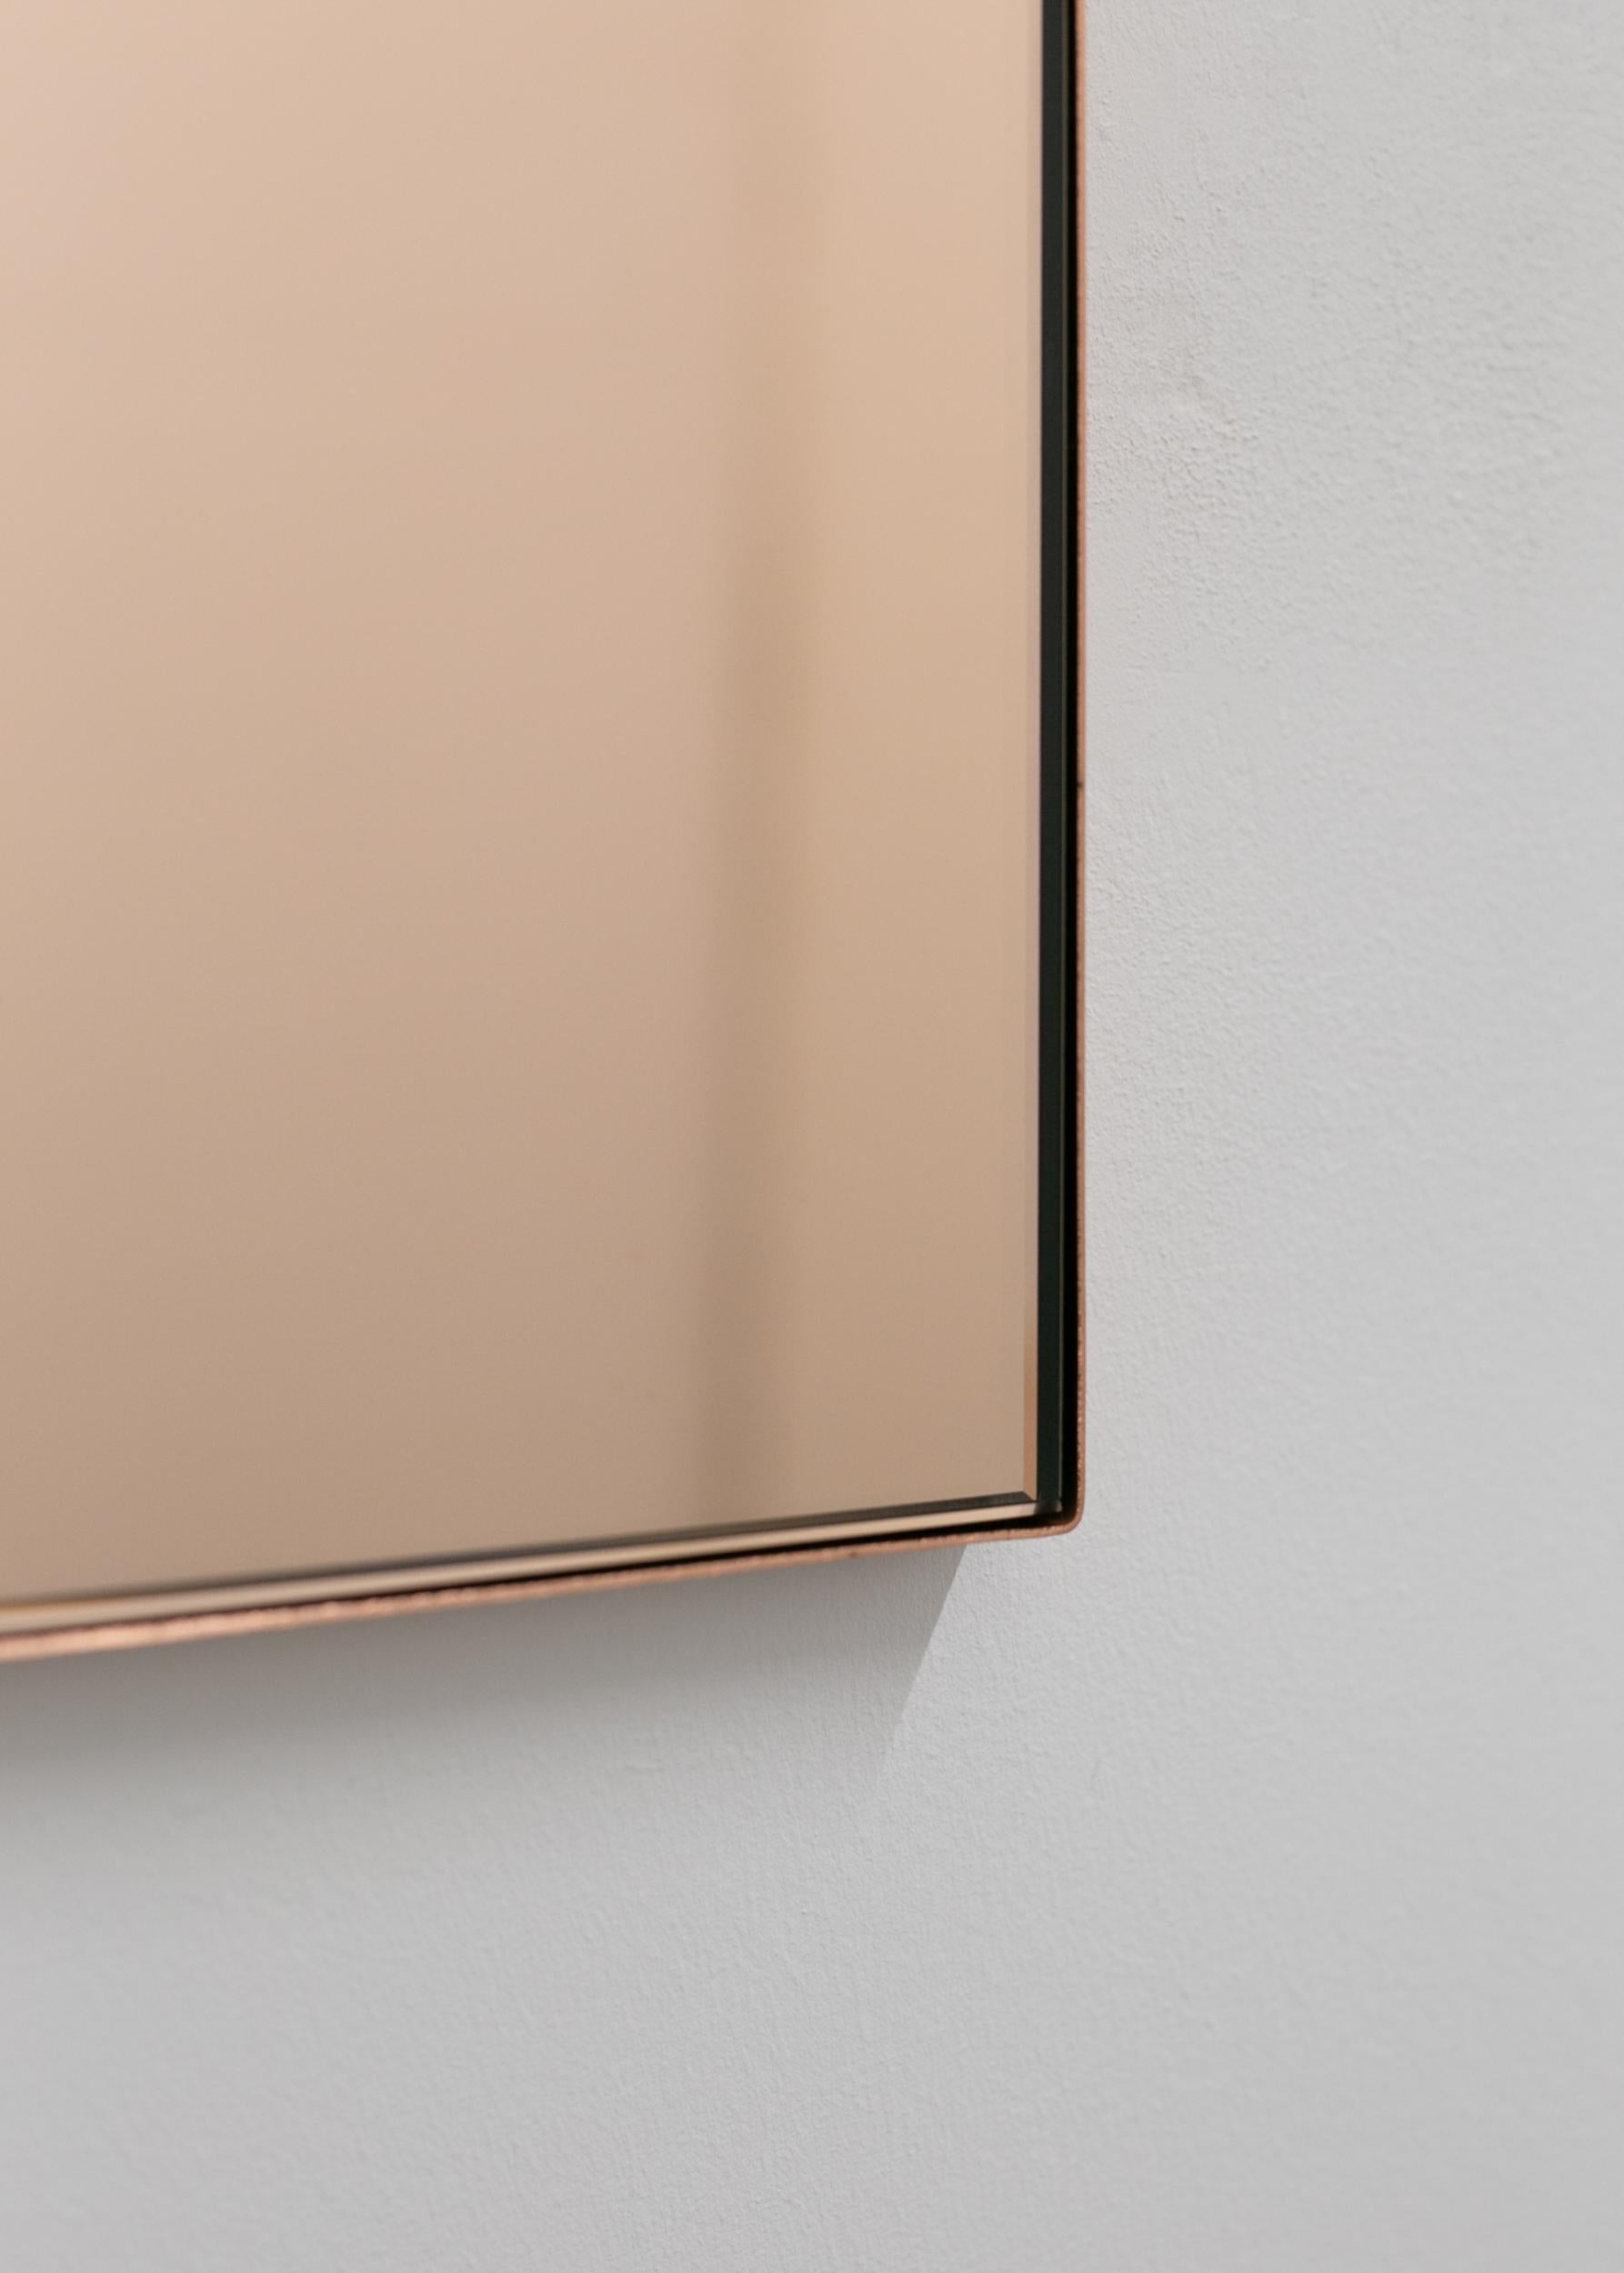 British Arcus Arch shaped Rose Gold Contemporary Mirror with a Copper Frame, Medium For Sale